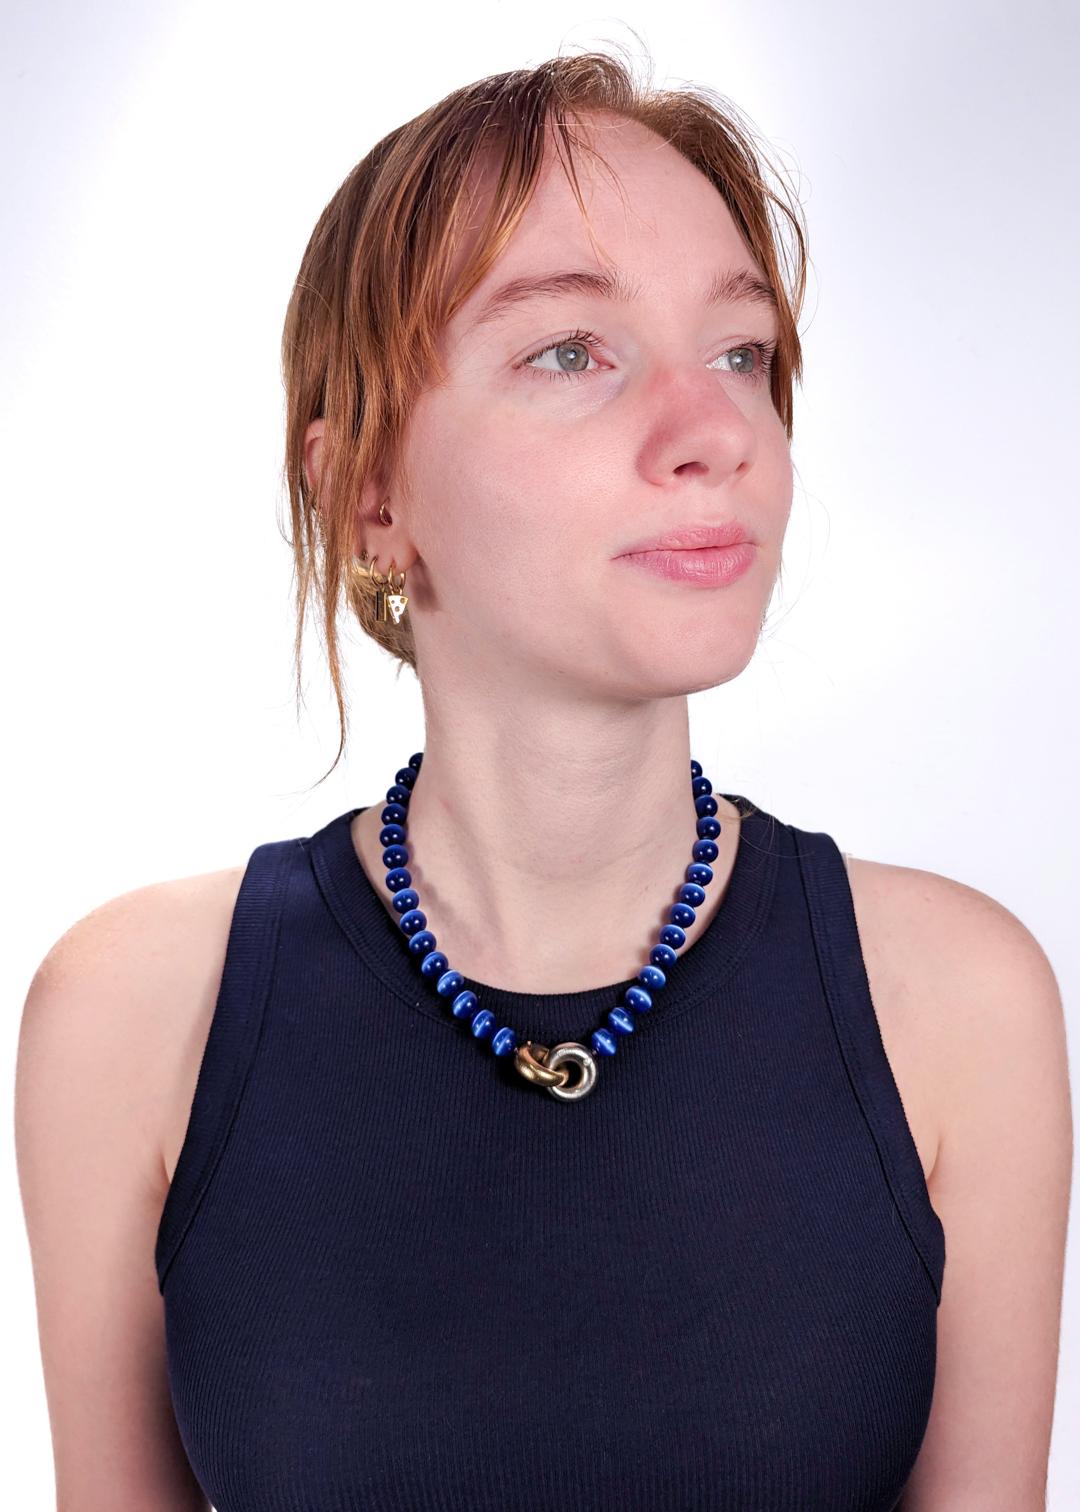 A very fine Ole Lynggaard collier or choker necklace.

With deep blue tiger's eye (or hawk's eye) beads.

Secured with yellow and white 18k gold hollow gold clasp shaped as interlocking rings that are each flush set with a round brilliant cut white